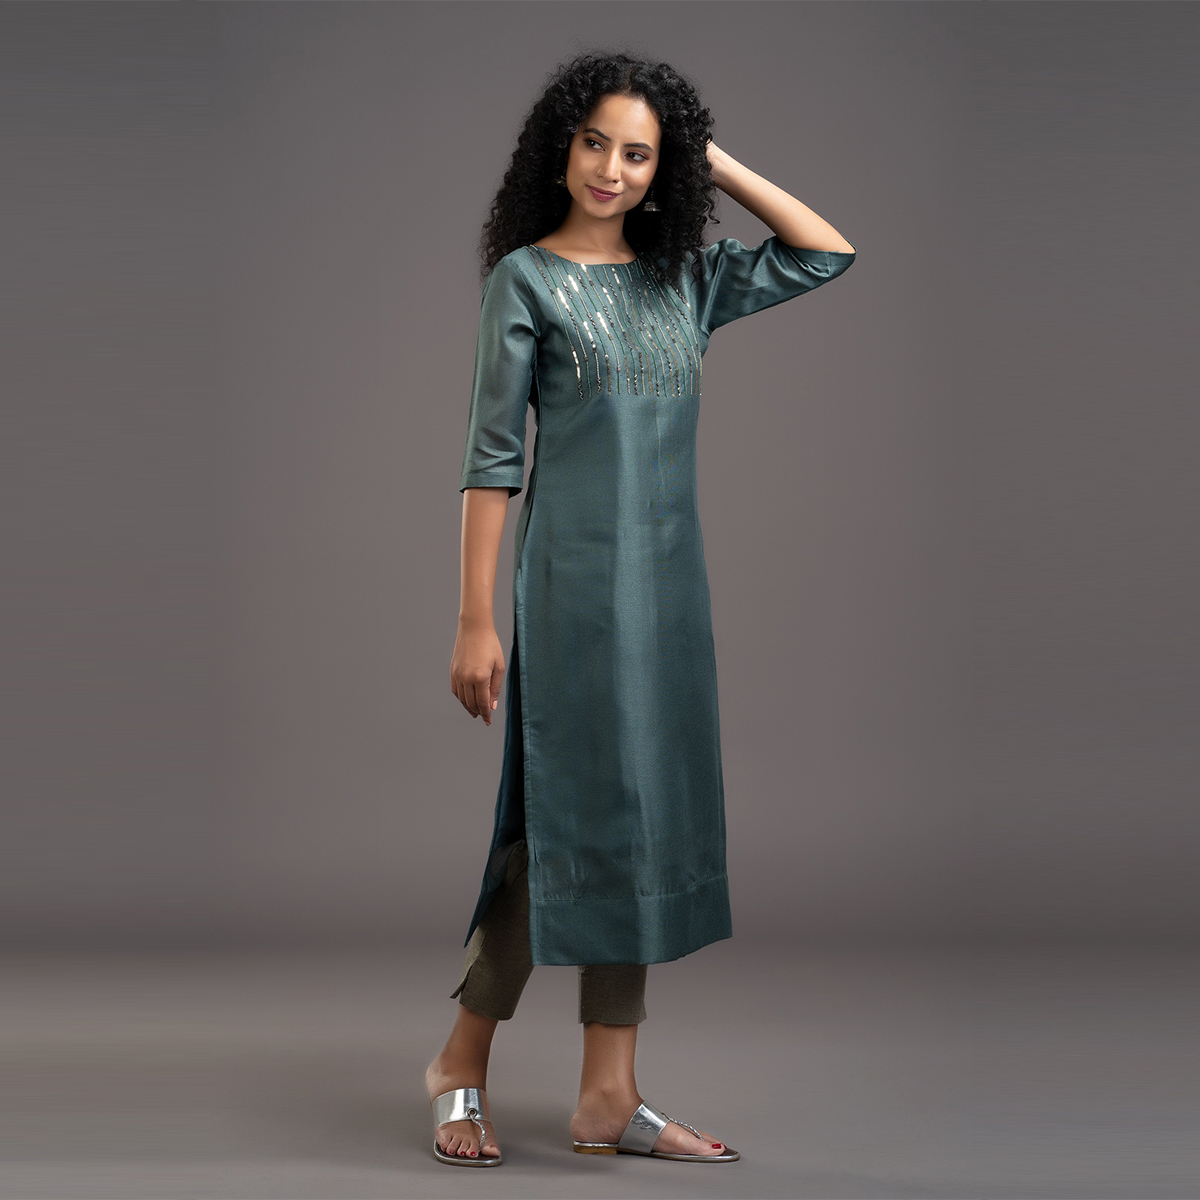 Zella Solid COlor Net Cotta Straight cut kurta with Vertical Lined Rich Embellishments on Yoke - Green